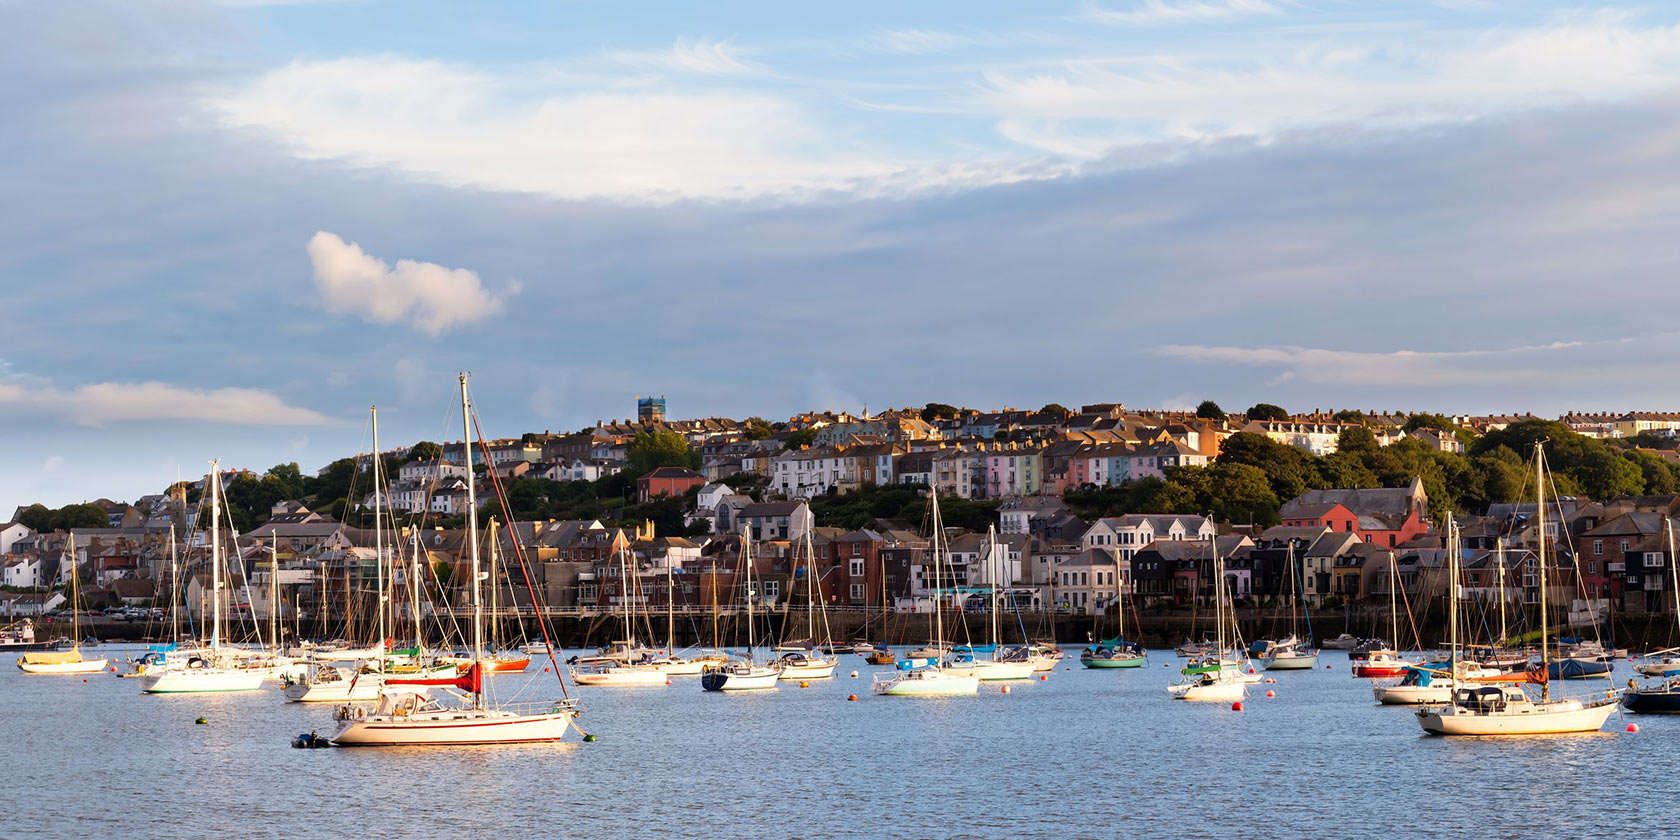 Falmouth Uk Train Holidays And Tours Great Rail Journeys